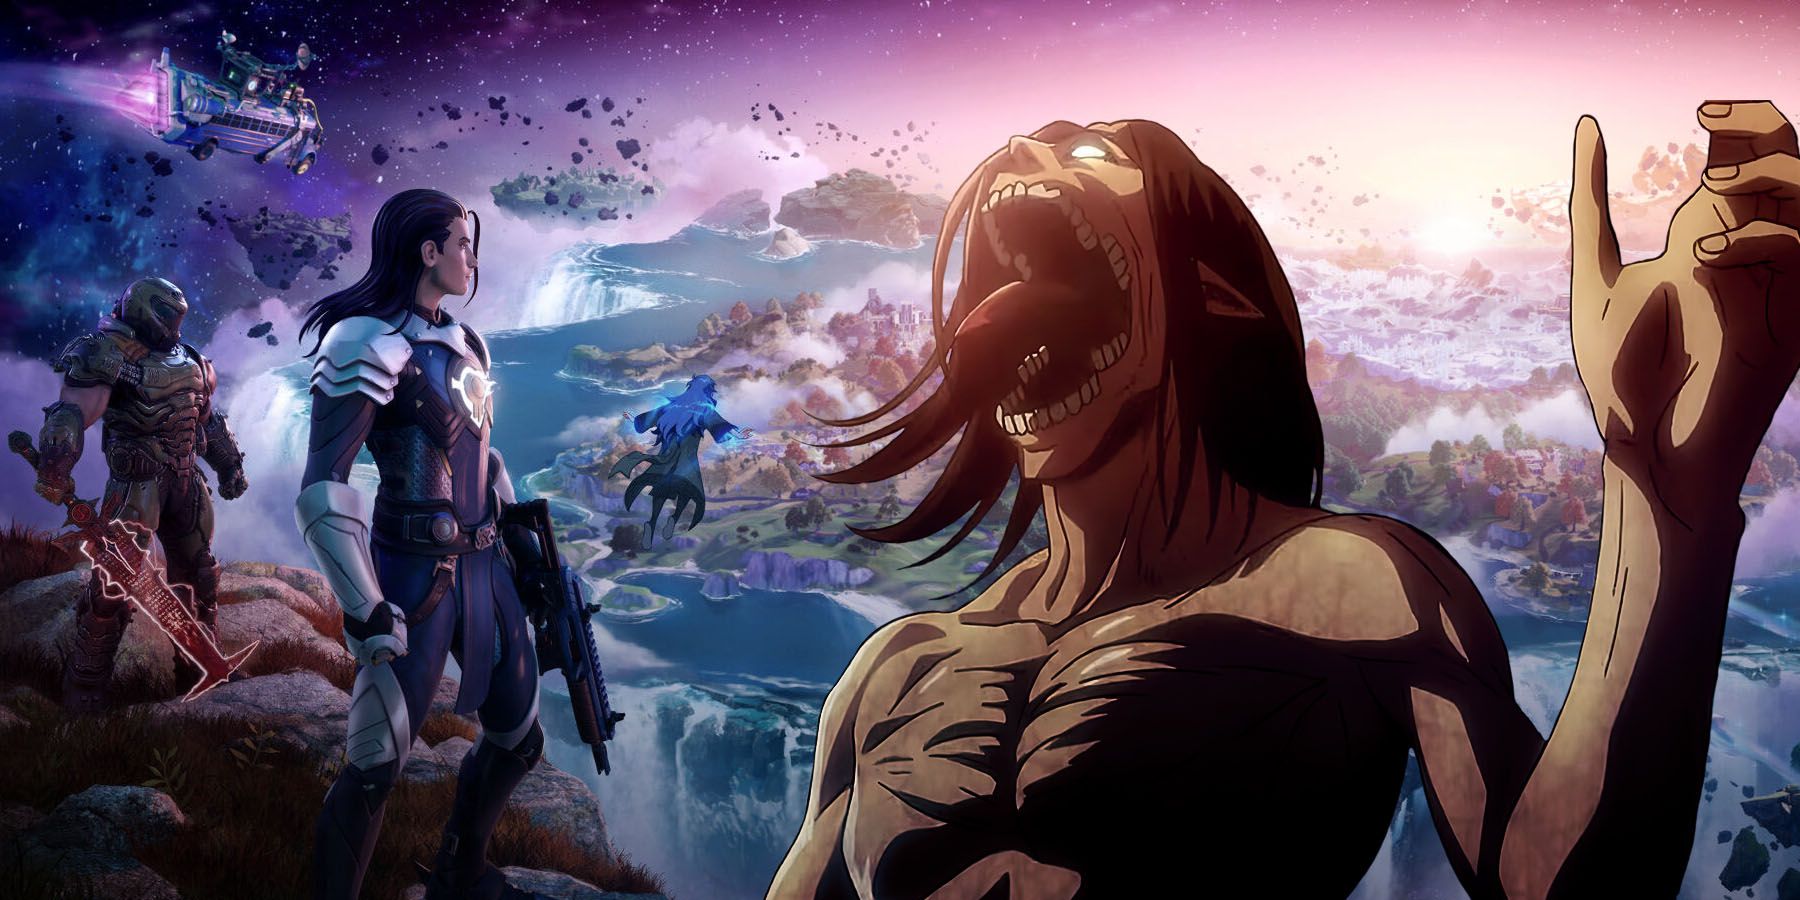 Fortnite Attack on Titan Crossover Rumours Surface Online